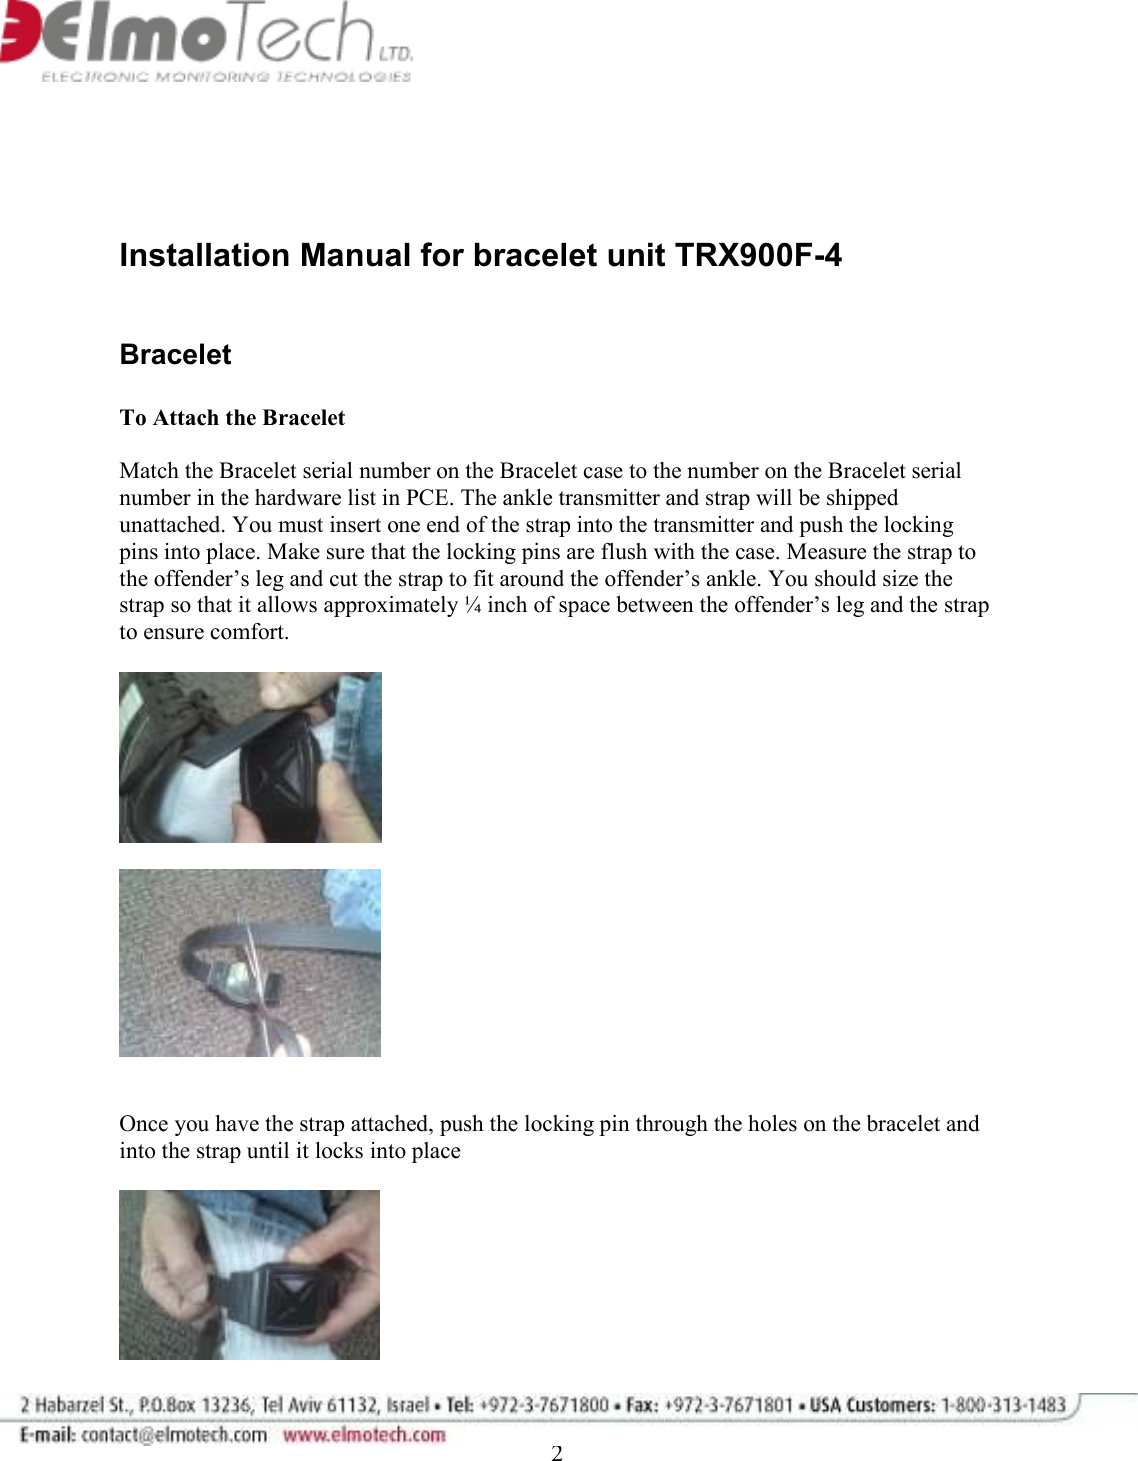              2    Installation Manual for bracelet unit TRX900F-4   Bracelet   To Attach the Bracelet   Match the Bracelet serial number on the Bracelet case to the number on the Bracelet serial number in the hardware list in PCE. The ankle transmitter and strap will be shipped unattached. You must insert one end of the strap into the transmitter and push the locking pins into place. Make sure that the locking pins are flush with the case. Measure the strap to the offender’s leg and cut the strap to fit around the offender’s ankle. You should size the strap so that it allows approximately ¼ inch of space between the offender’s leg and the strap to ensure comfort.        Once you have the strap attached, push the locking pin through the holes on the bracelet and into the strap until it locks into place    